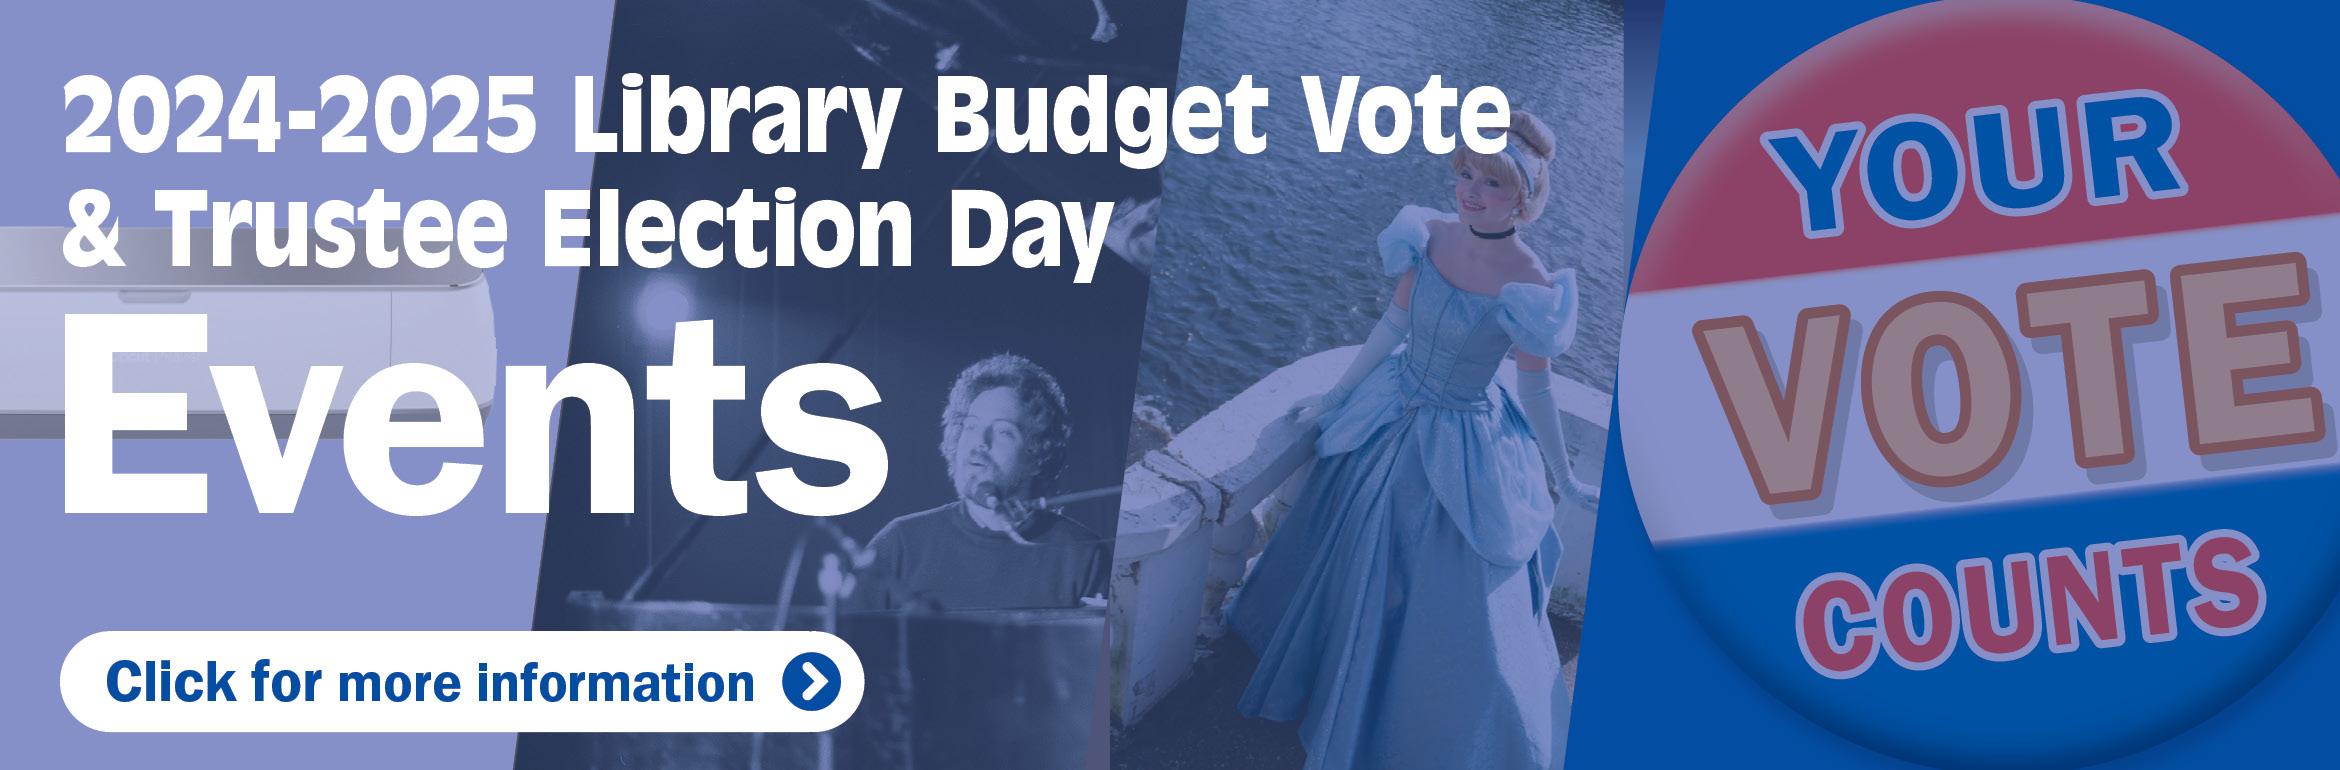 2024-2025 Library Budget Vote & Trustee Election Day Events. Click for more information.